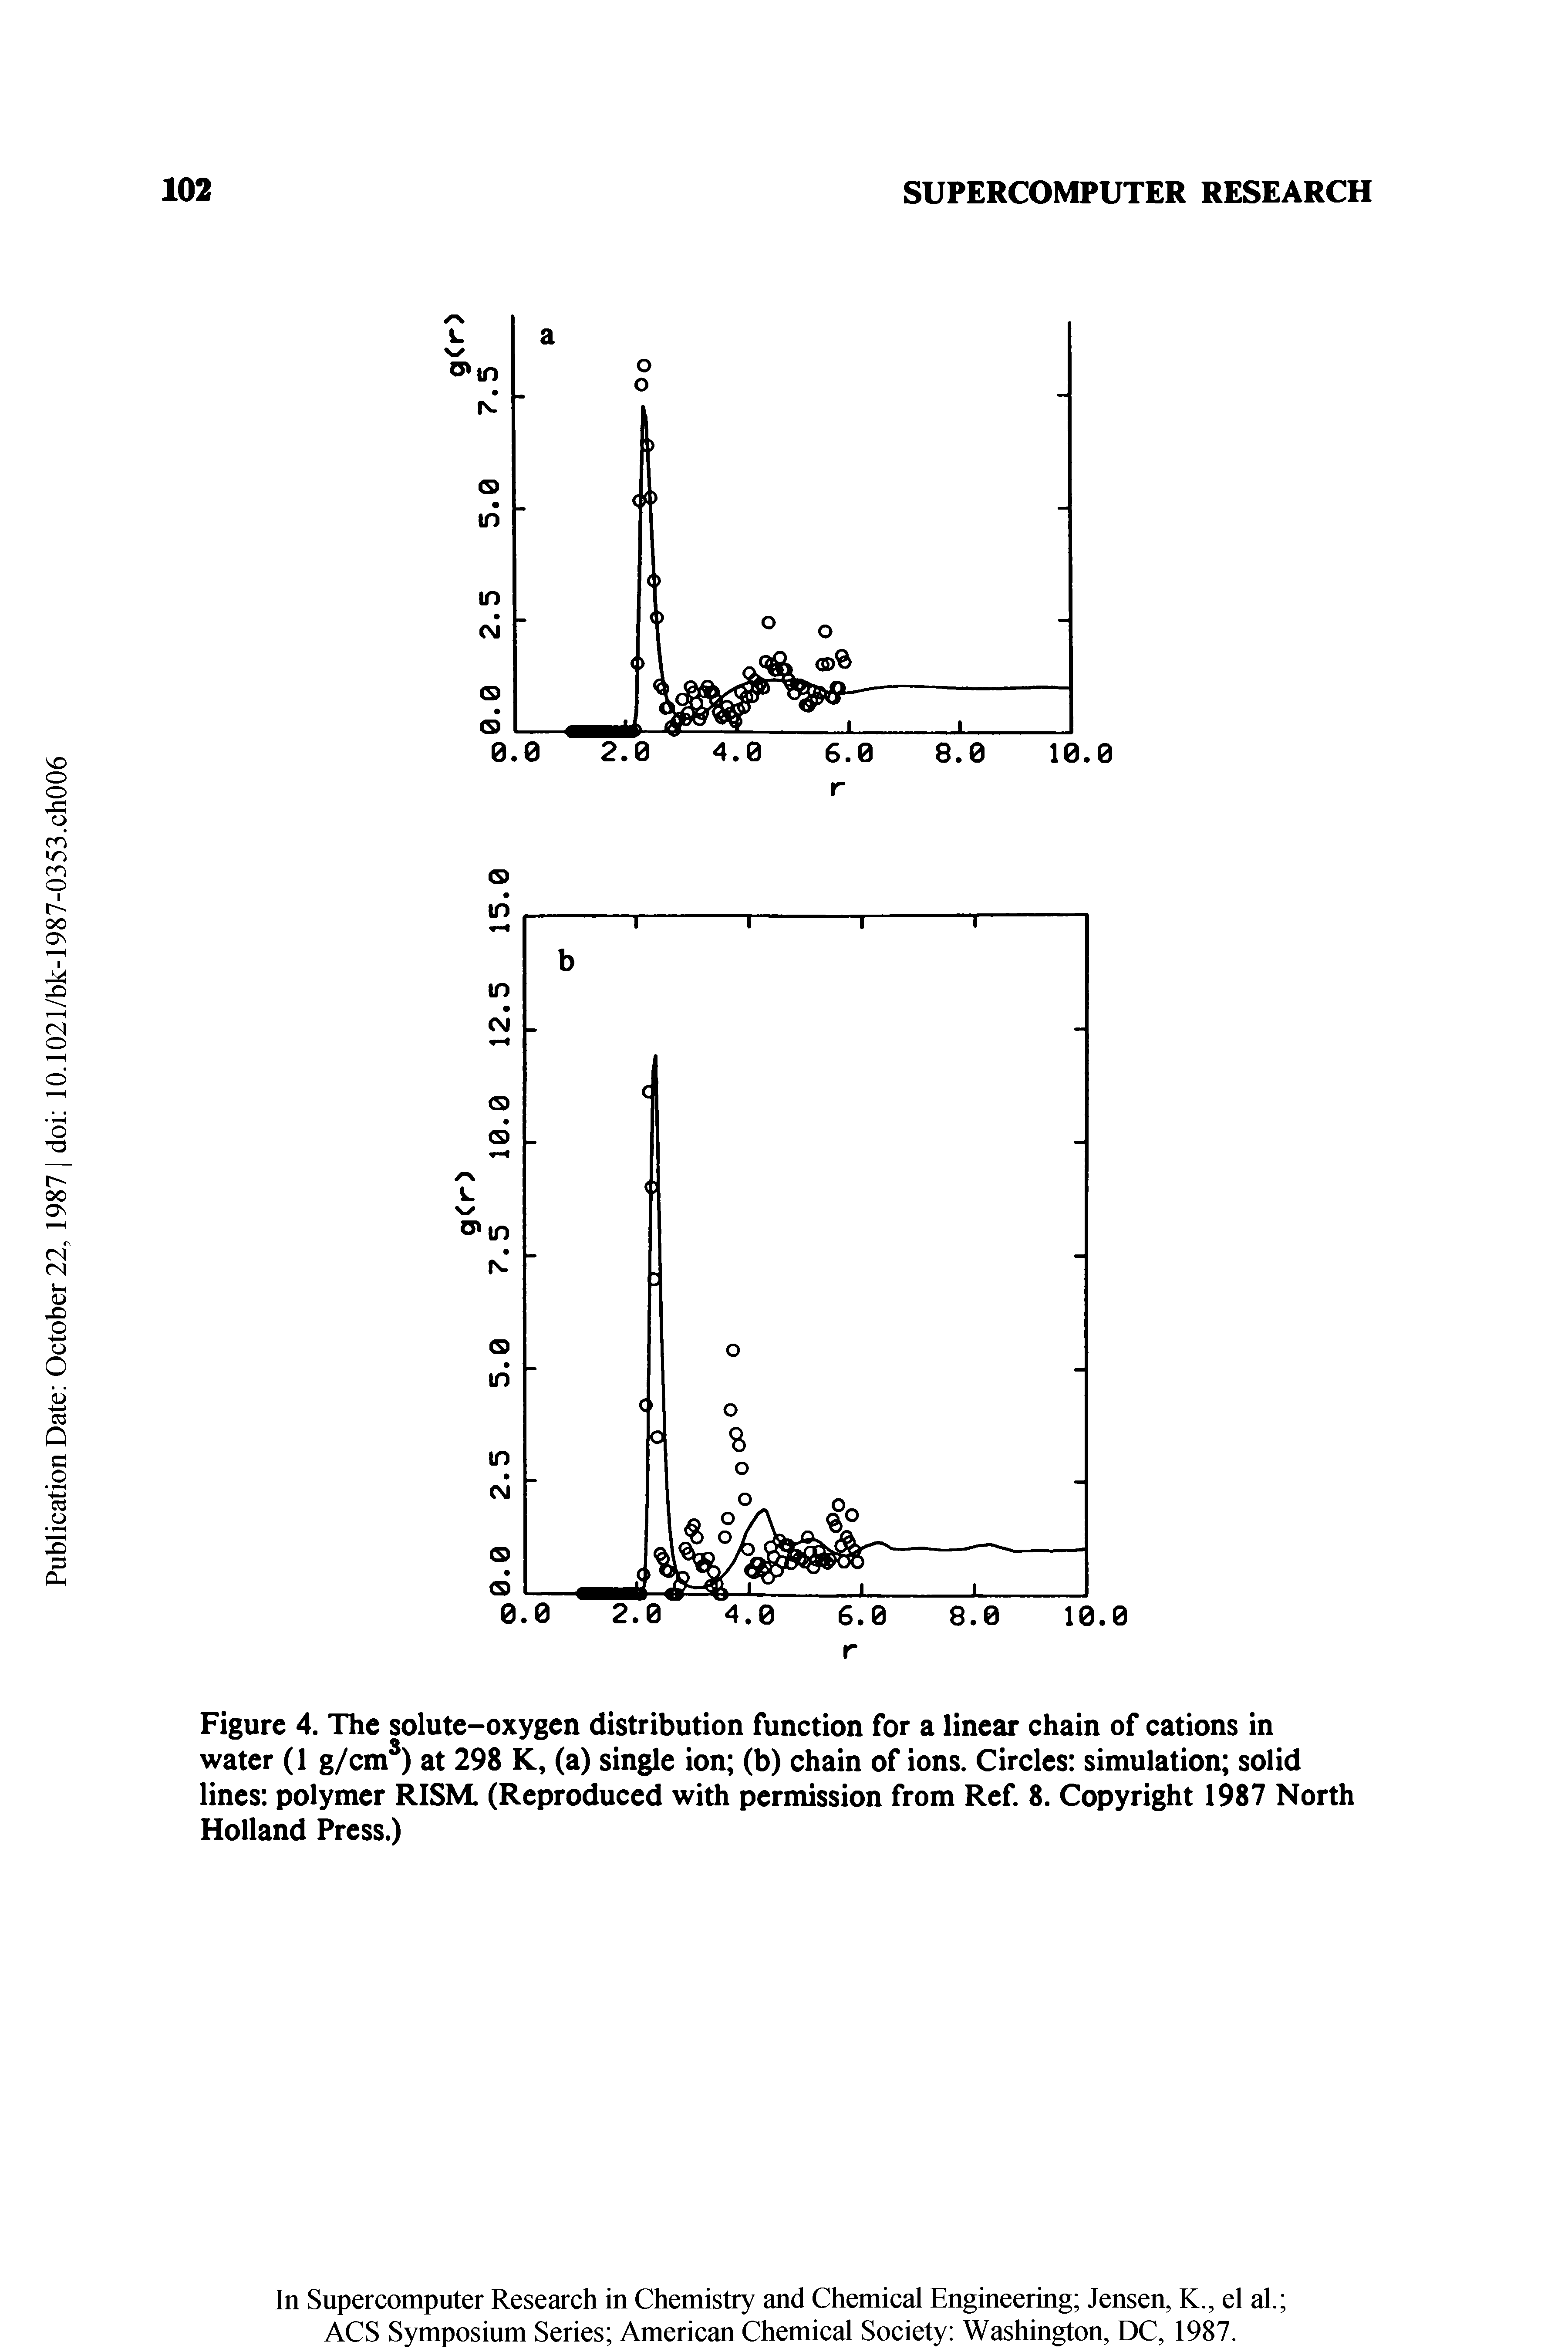 Figure 4. The solute-oxygen distribution function for a linear chain of cations in water (1 g/cm ) at 298 K, (a) single ion (b) chain of ions. Circles simulation solid lines polymer RISM. (Reproduced with permission from Ref. 8. Copyright 1987 North Holland Press.)...